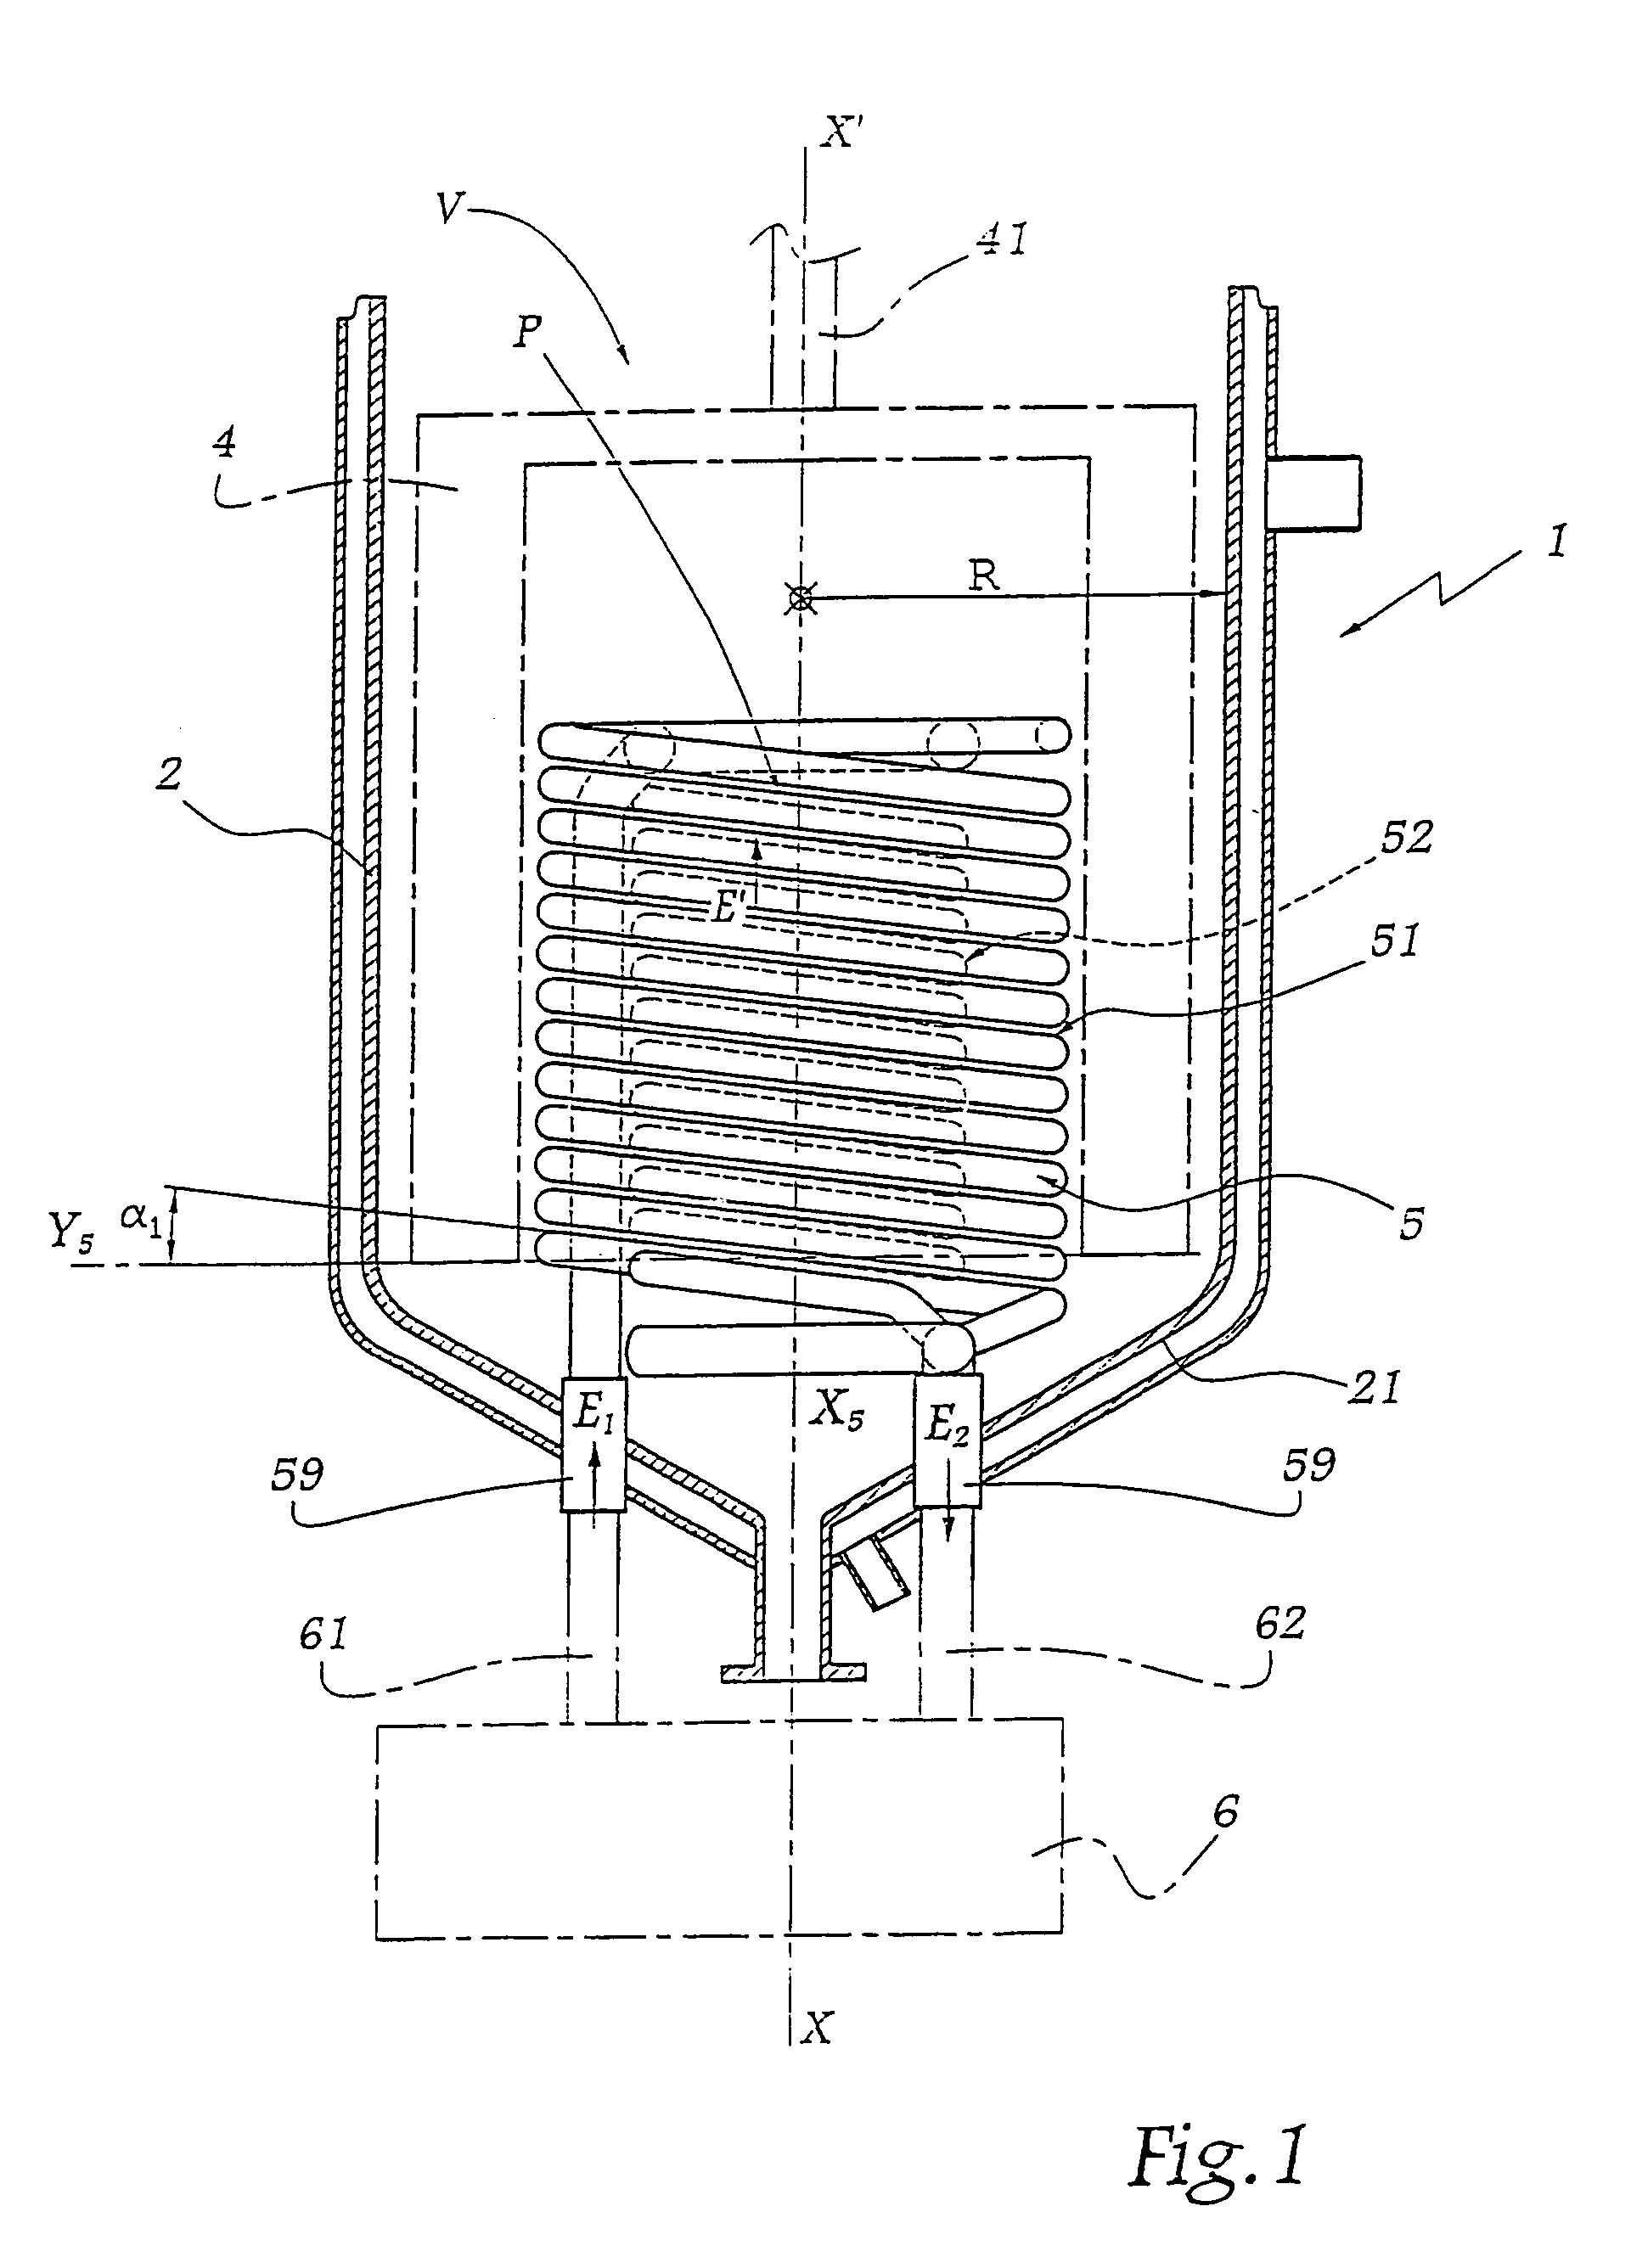 Coil for coolant circulation, method for making same and reactor comprising same